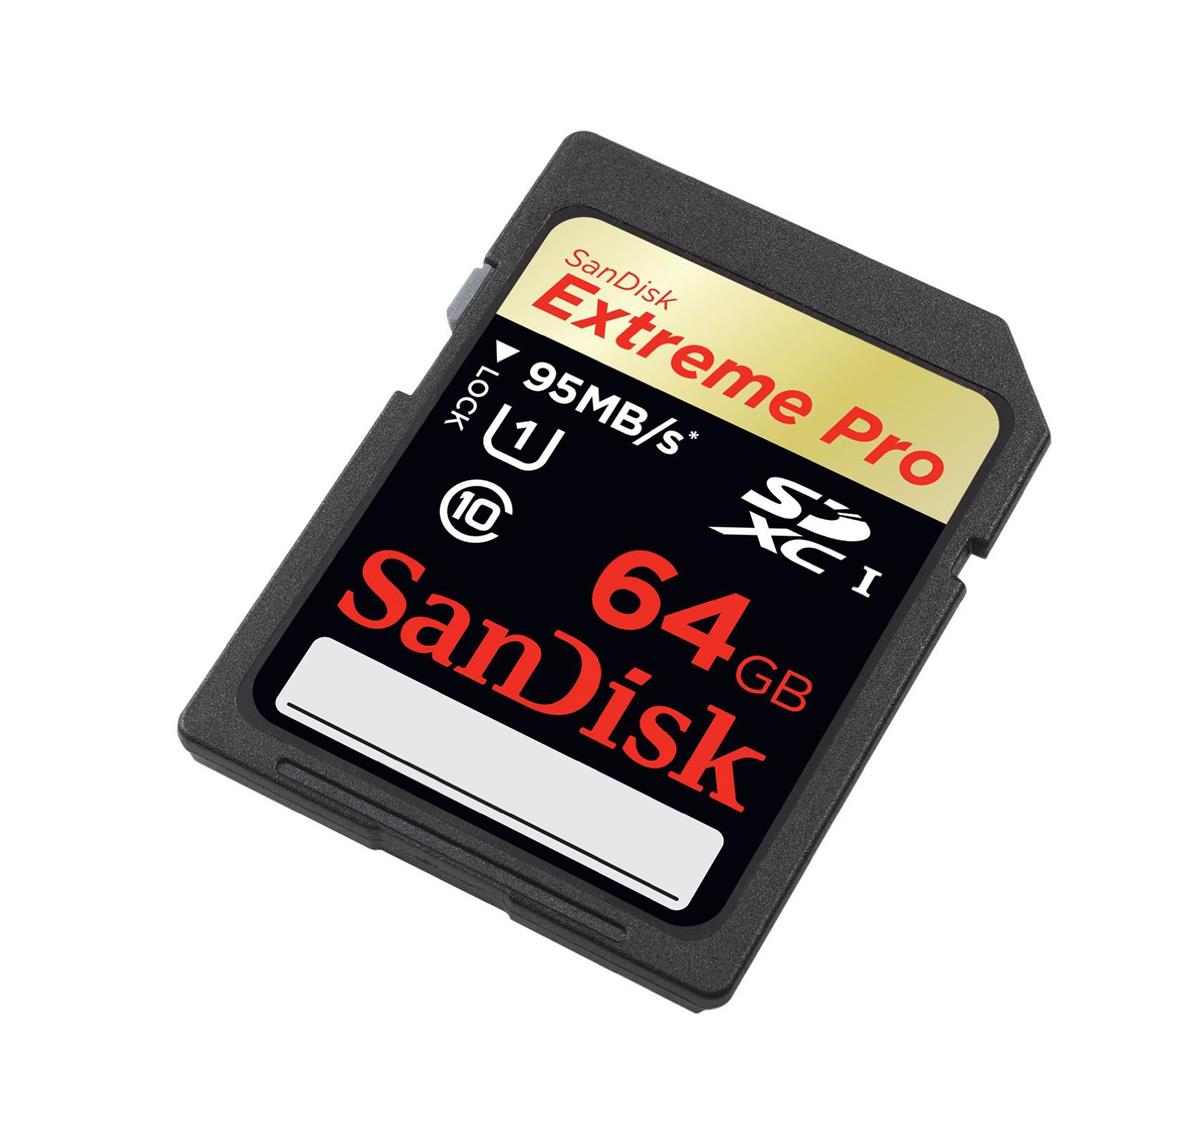 SDSSDXPS-960G-G25 | SanDisk Extreme Pro 960GB SATA 6Gb/s 2.5 Solid State Drive (SSD)